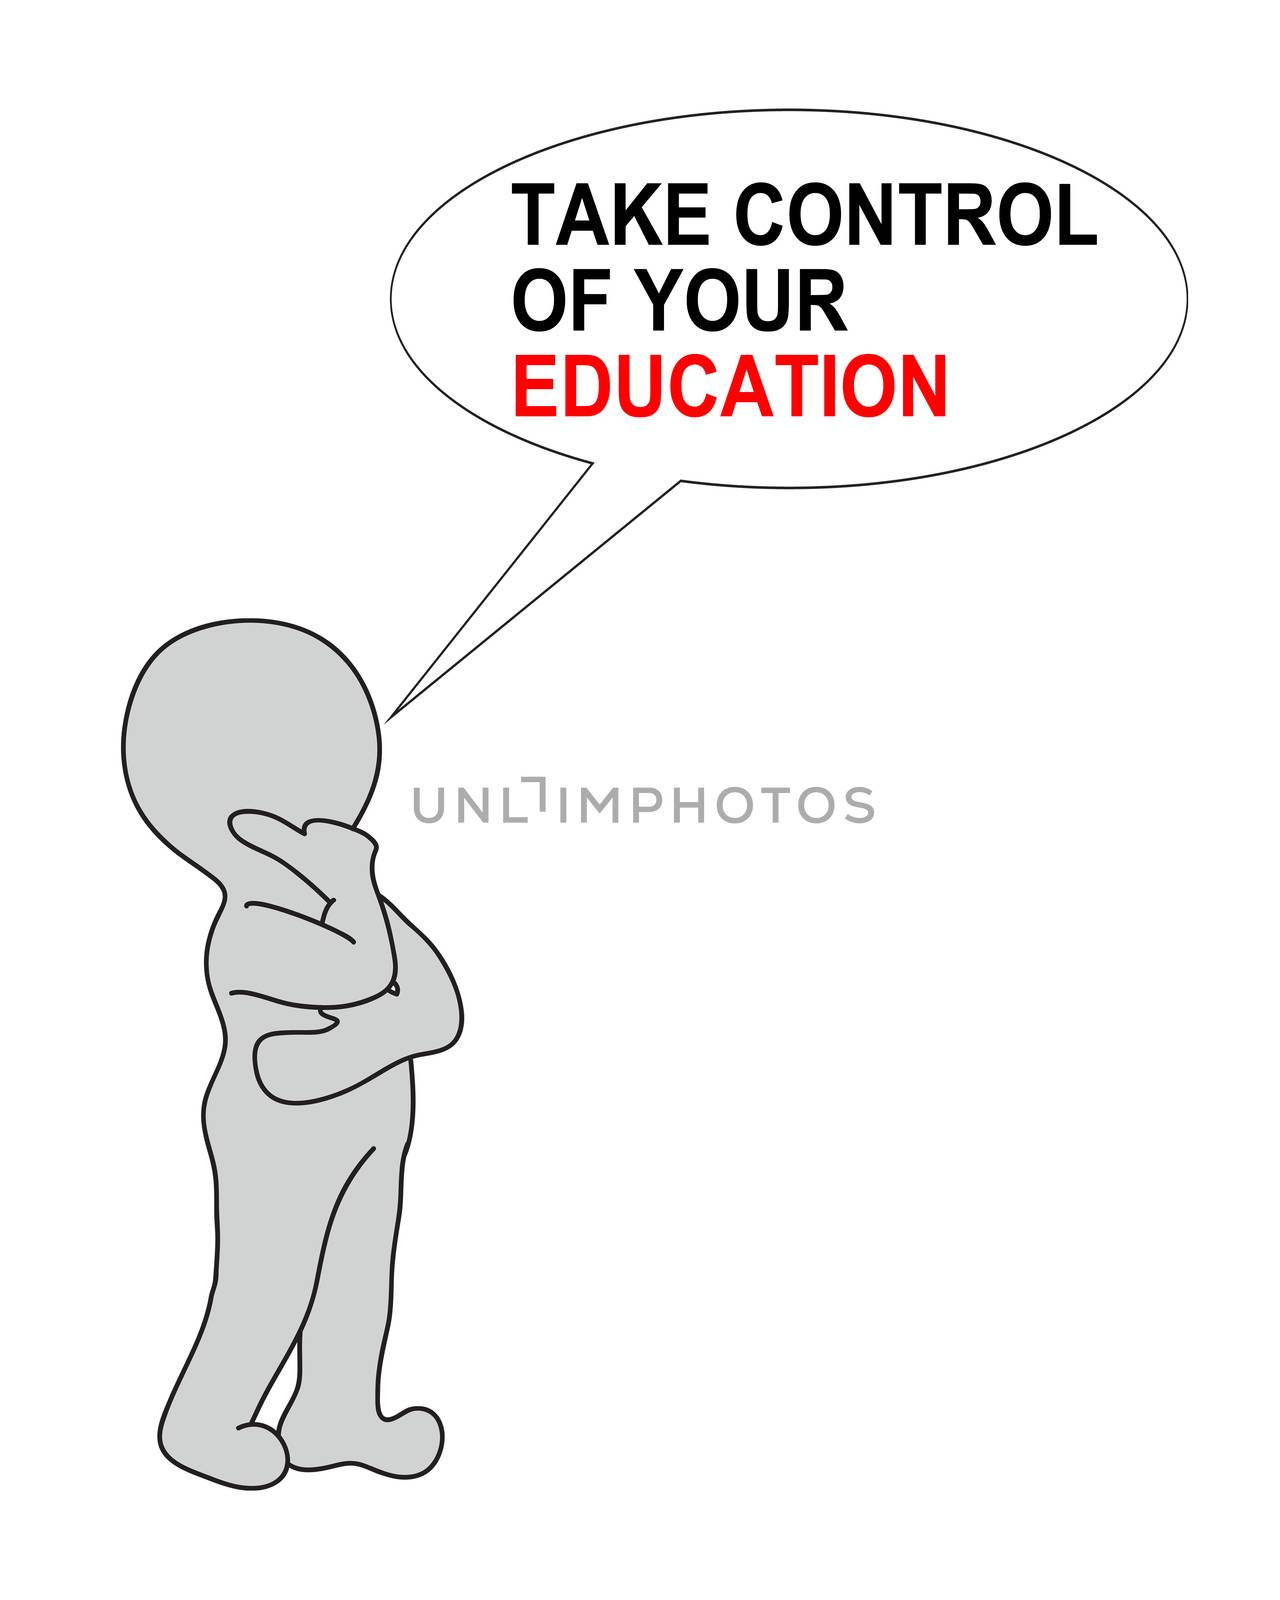 TAKE CONTROL OF YOUR EDUCATION on white background writing in bubble end 2d white man   made in 2d software